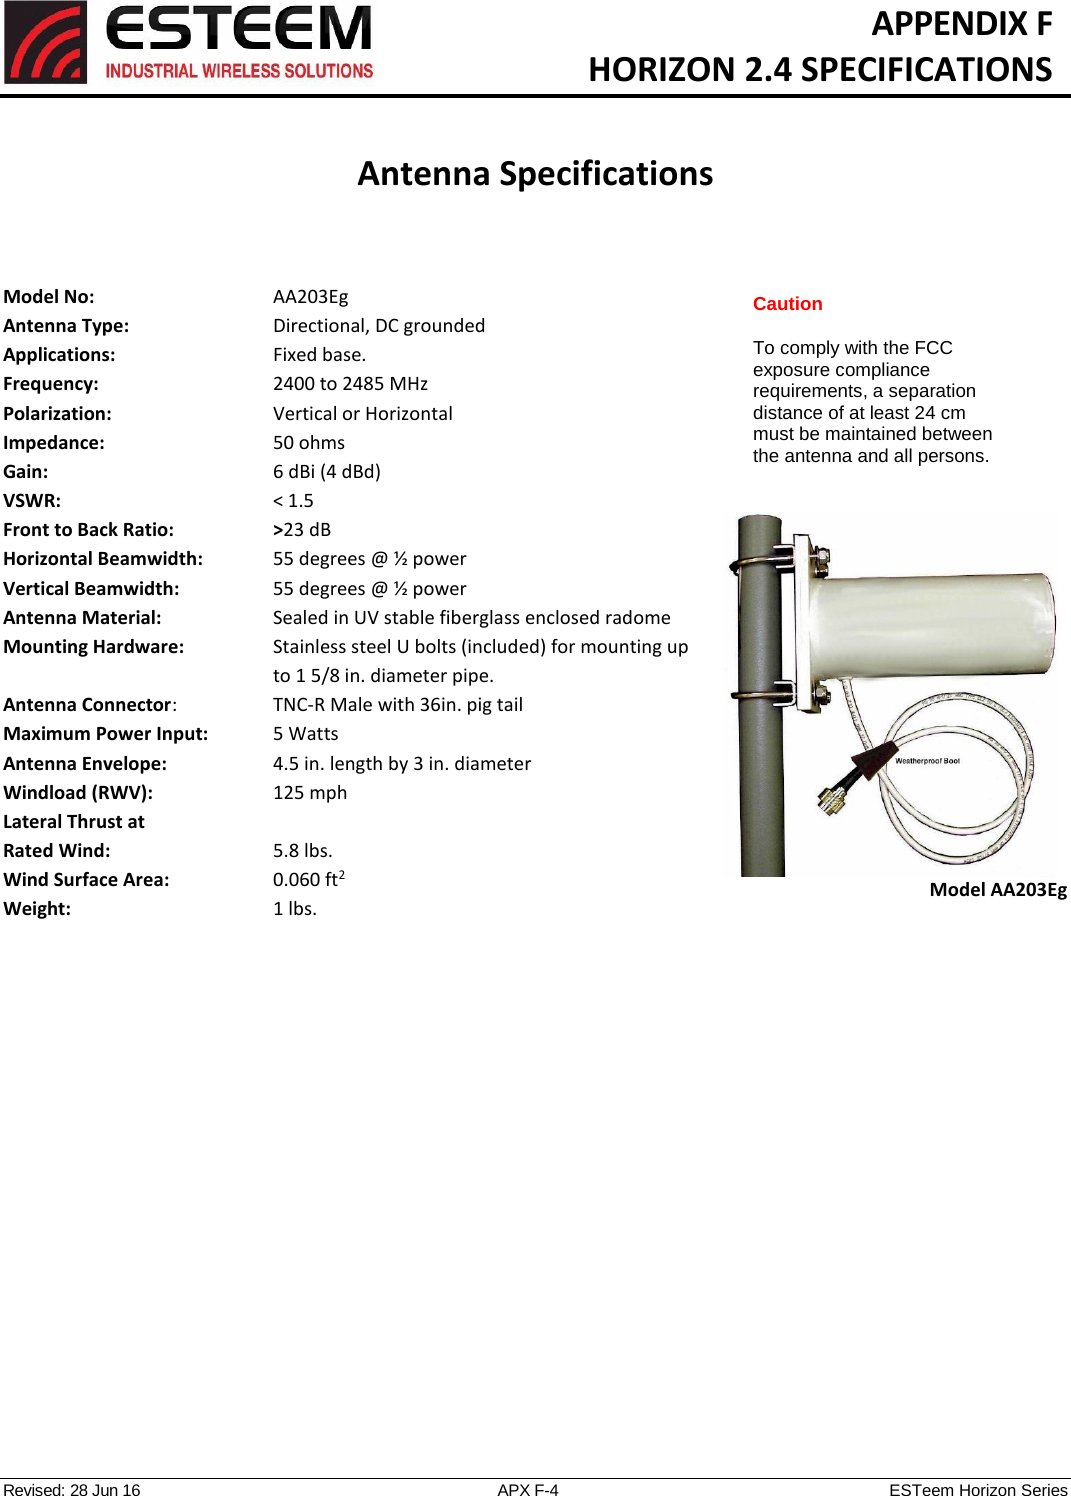   APPENDIX F   HORIZON 2.4 SPECIFICATIONS   Antenna Specifications   Revised: 28 Jun 16  APX F-4  ESTeem Horizon Series   Model No:        AA203Eg Antenna Type:  Directional, DC grounded  Applications:  Fixed base. Frequency:      2400 to 2485 MHz  Polarization:      Vertical or Horizontal Impedance:        50 ohms Gain:           6 dBi (4 dBd) VSWR:           &lt; 1.5  Front to Back Ratio:    &gt;23 dB Horizontal Beamwidth:    55 degrees @ ½ power Vertical Beamwidth:      55 degrees @ ½ power Antenna Material:  Sealed in UV stable fiberglass enclosed radome  Mounting Hardware:    Stainless steel U bolts (included) for mounting up to 1 5/8 in. diameter pipe. Antenna Connector:    TNC-R Male with 36in. pig tail Maximum Power Input:    5 Watts Antenna Envelope:    4.5 in. length by 3 in. diameter Windload (RWV):    125 mph Lateral Thrust at  Rated Wind:  5.8 lbs. Wind Surface Area:  0.060 ft2 Weight:  1 lbs.      Model AA203Eg Caution  To comply with the FCC exposure compliance requirements, a separation distance of at least 24 cm must be maintained between the antenna and all persons. 